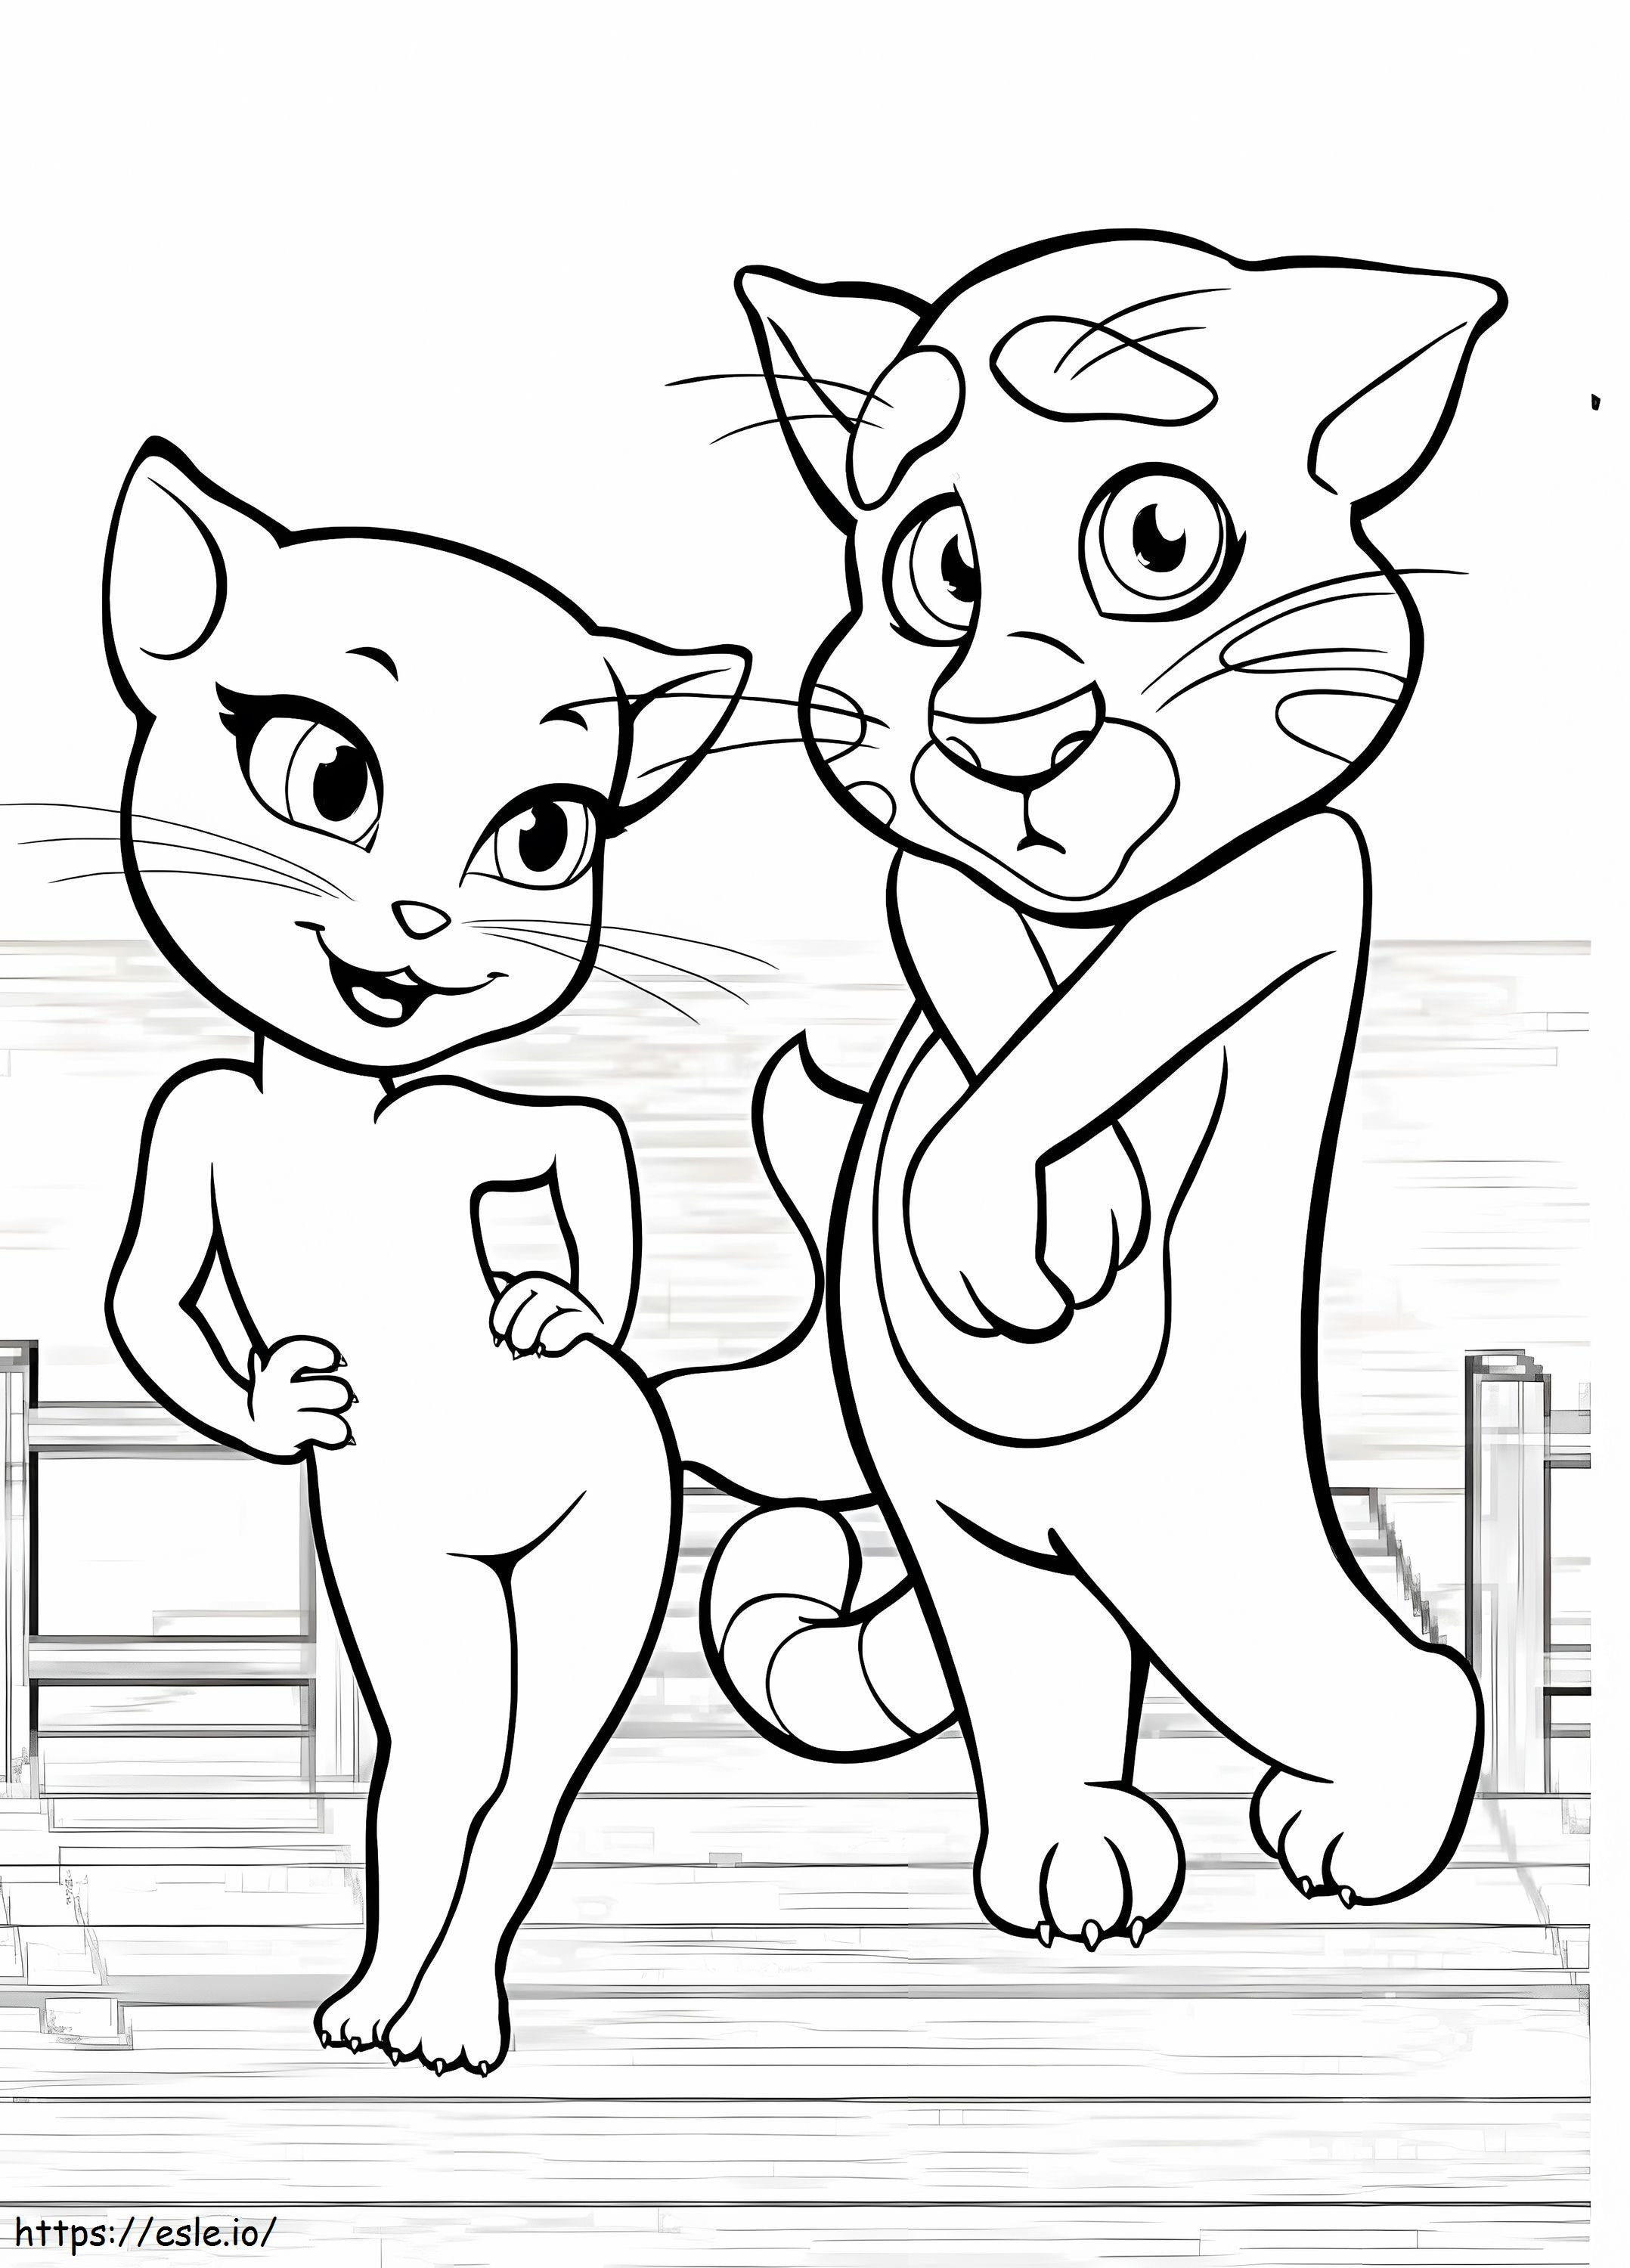 Talking Tom Is Shy coloring page